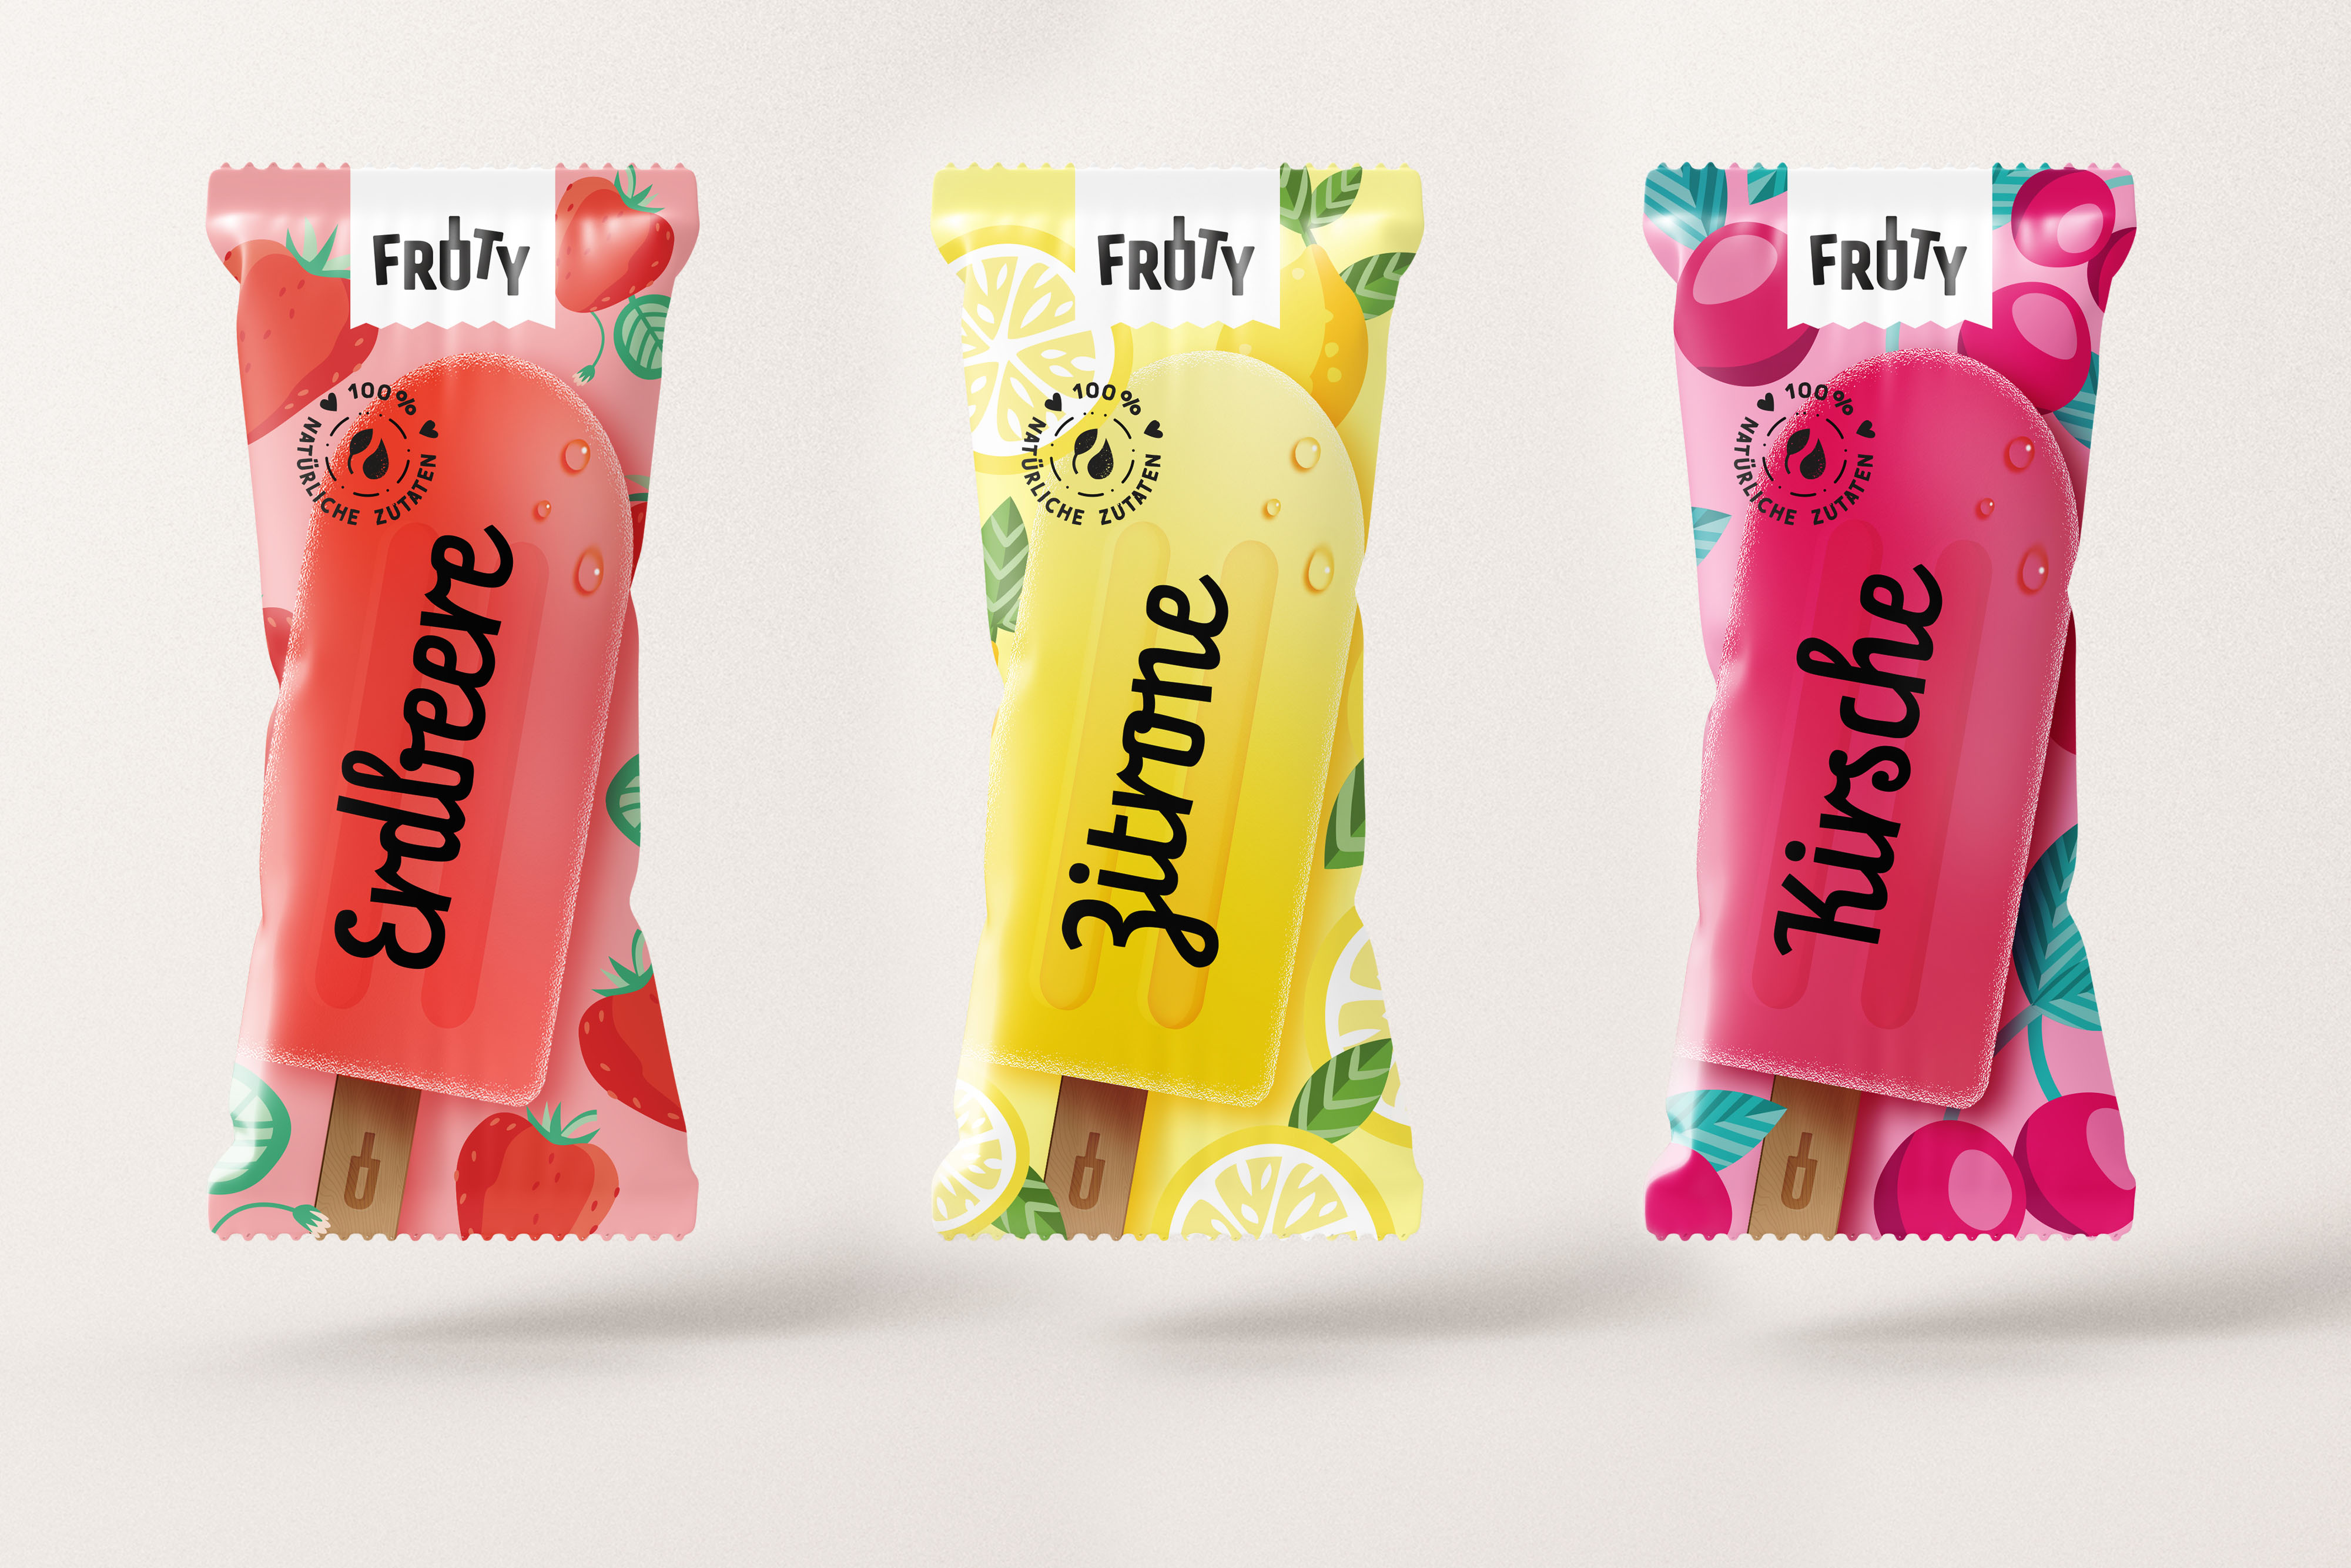 Conceptual Packaging Design for Fruty